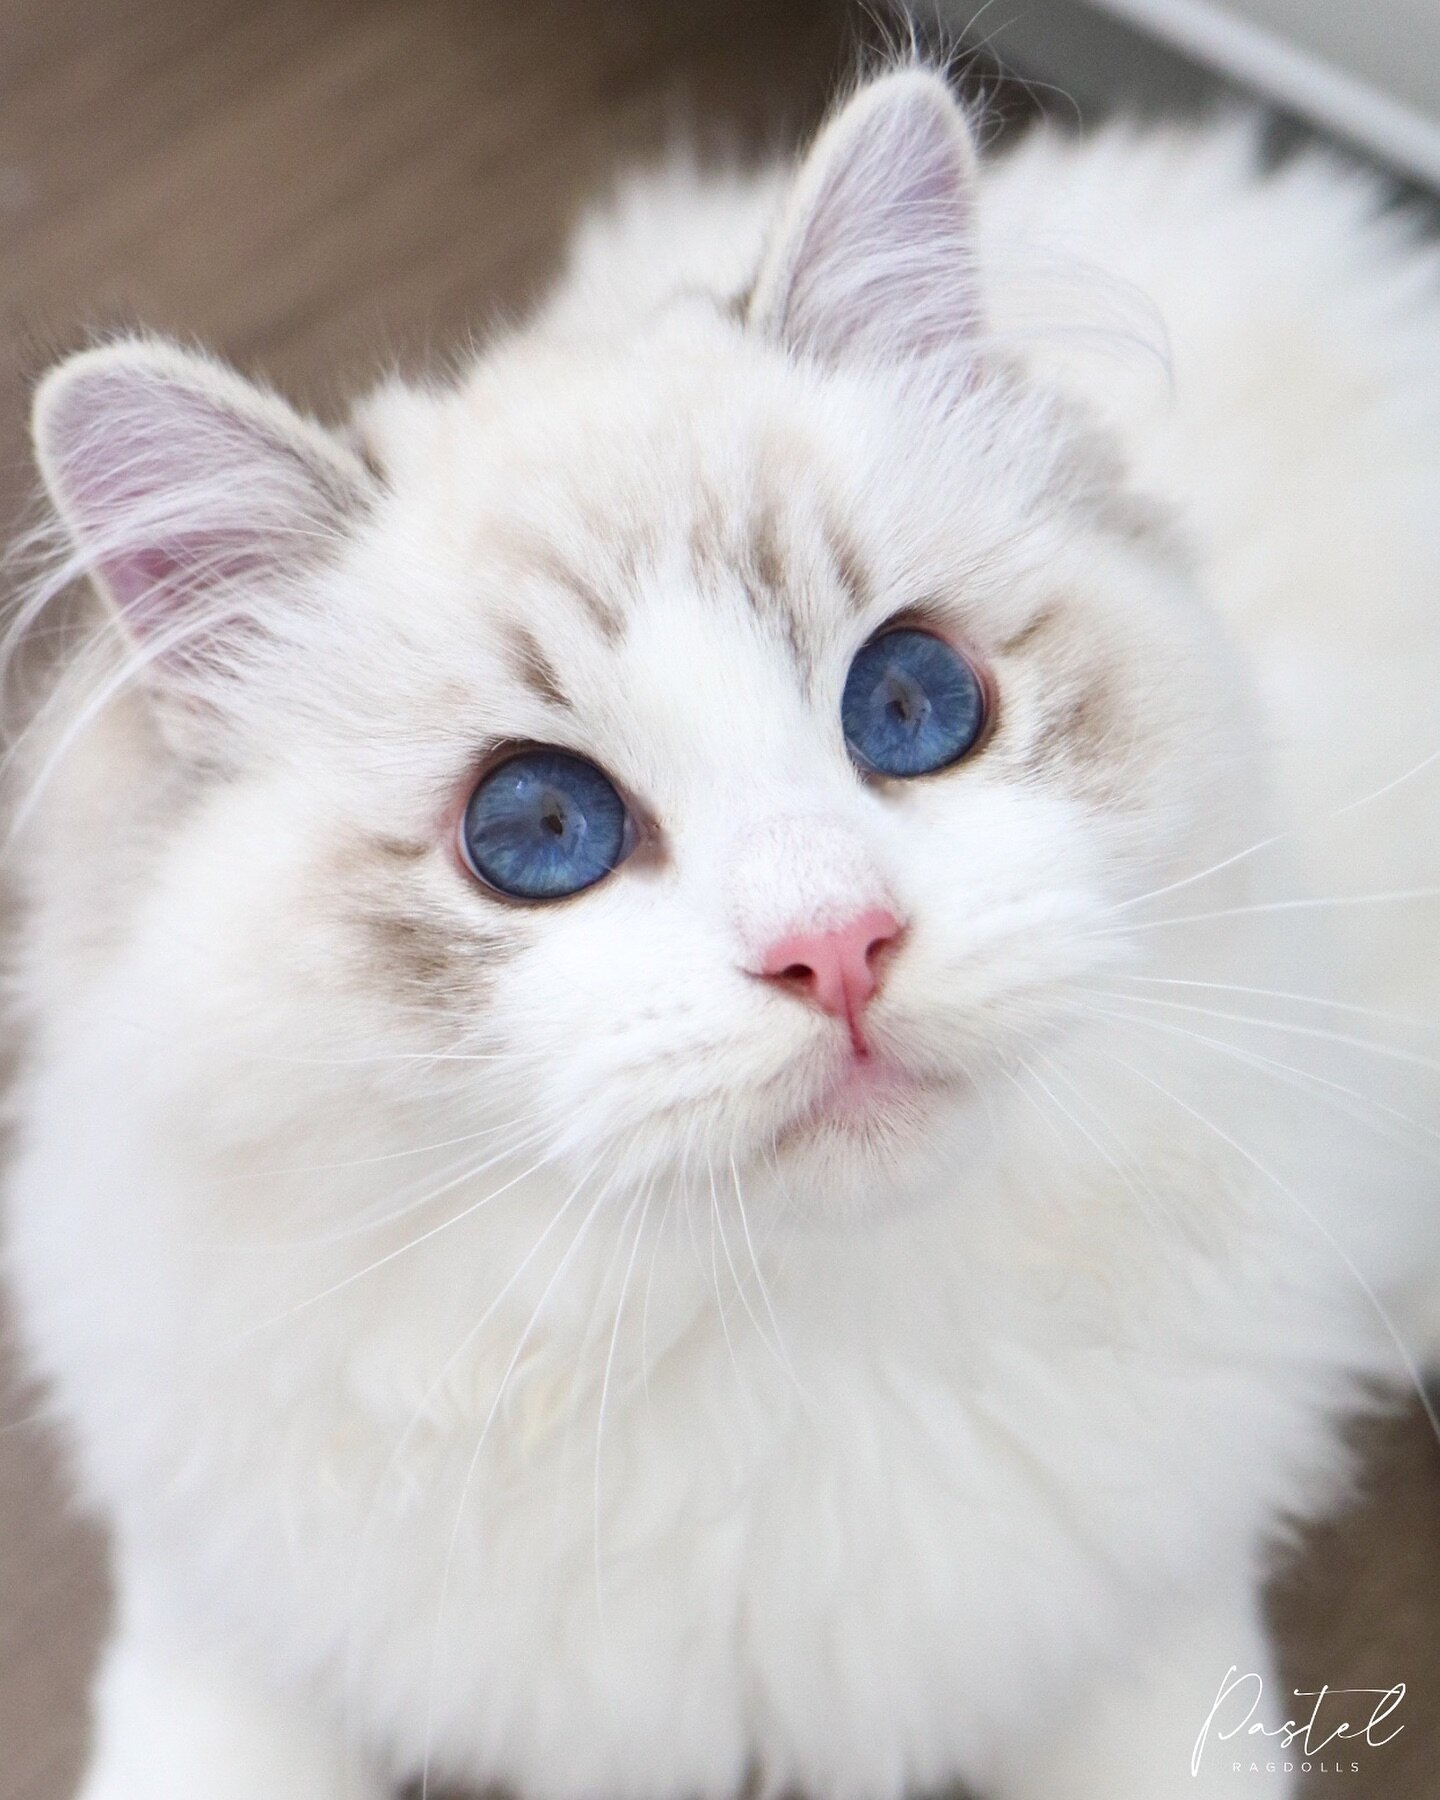 Hello eye color! 😻 Cosmo&rsquo;s eyes are completely unedited and unenhanced in this photo. You will often see pale, diluted and washed out eyes on Ragdolls, which is not ideal. The Ragdoll breed standard calls for large oval blue eyes, with prefere